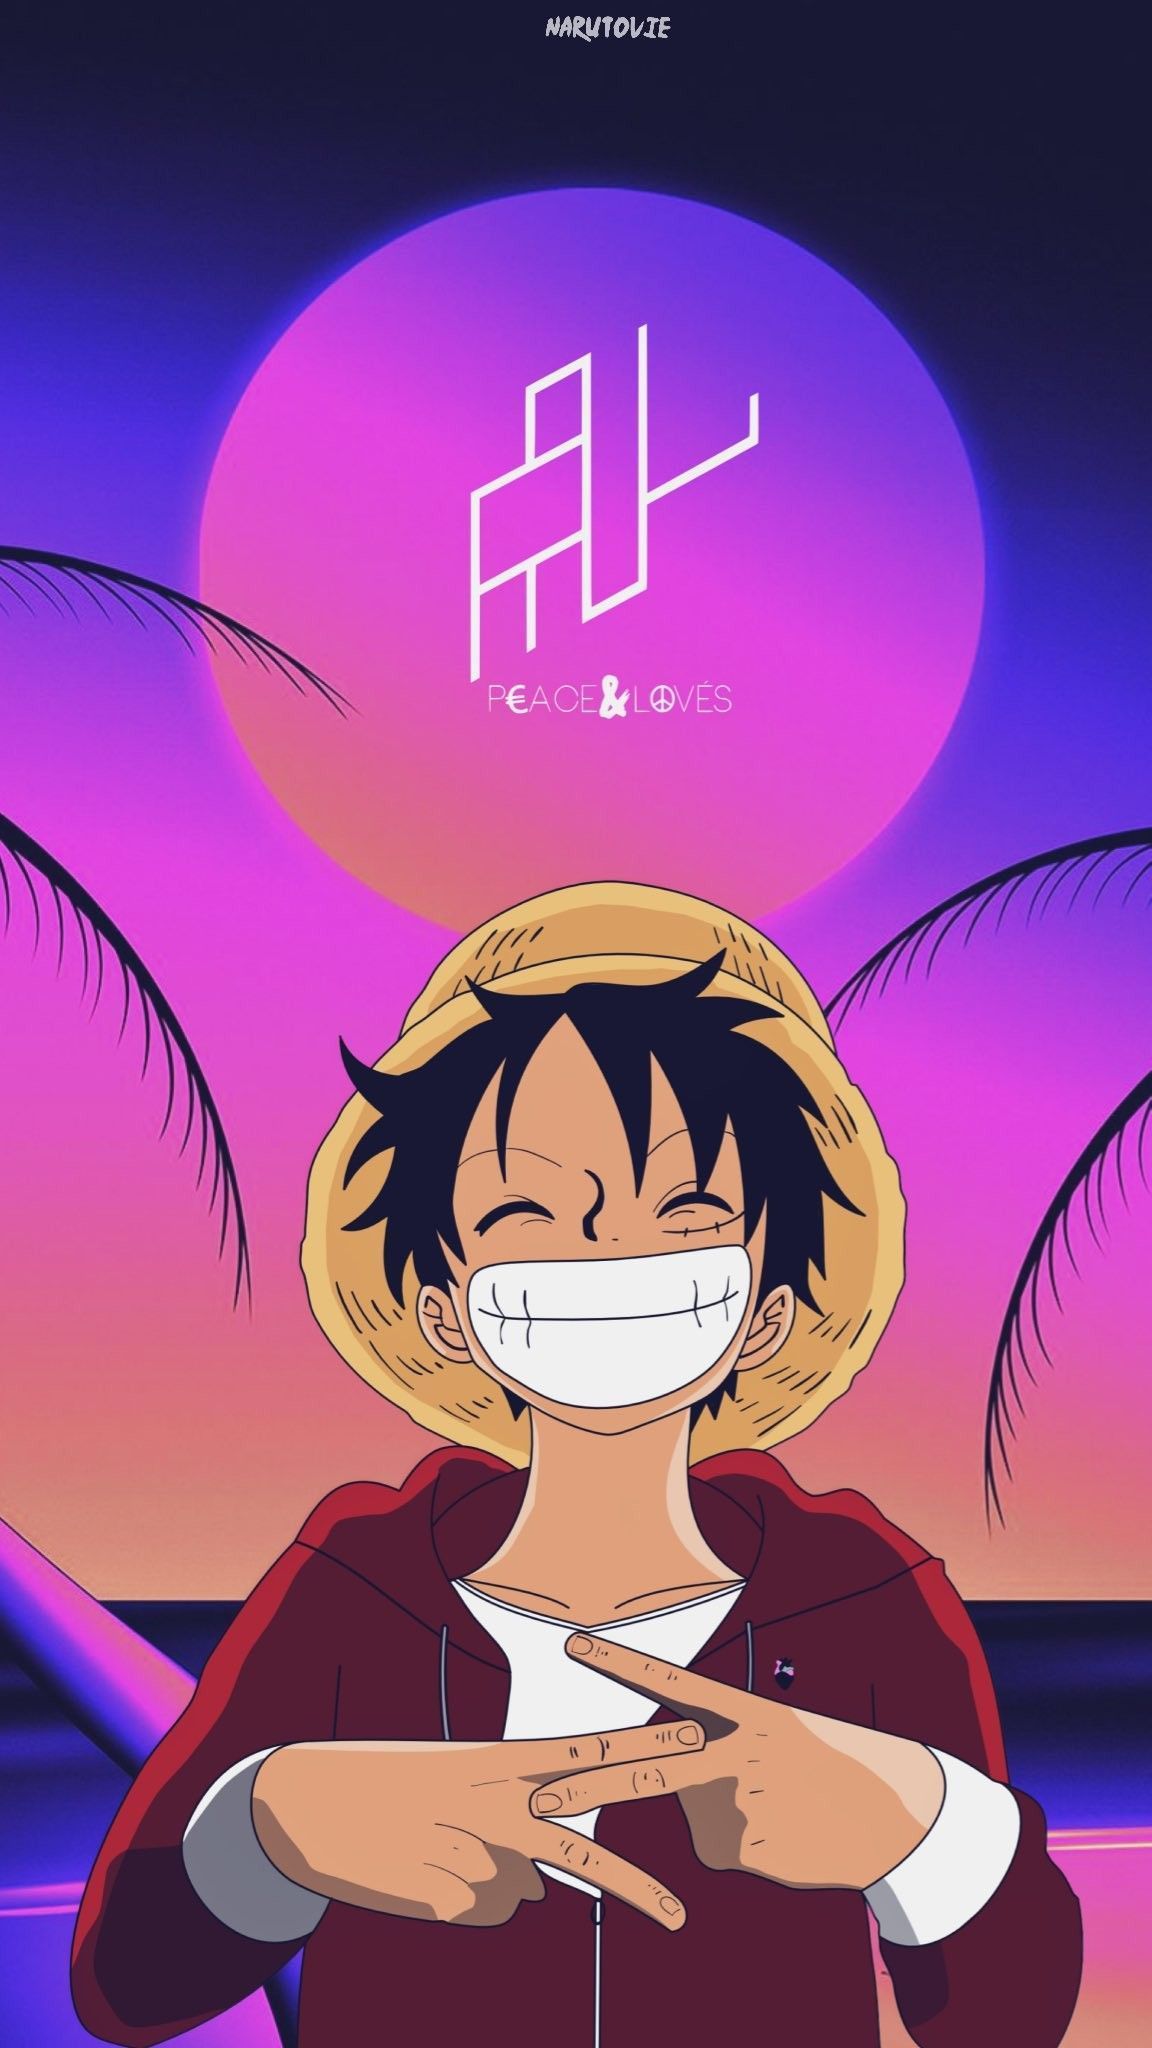 One Piece iPhone Wallpapers on WallpaperDog